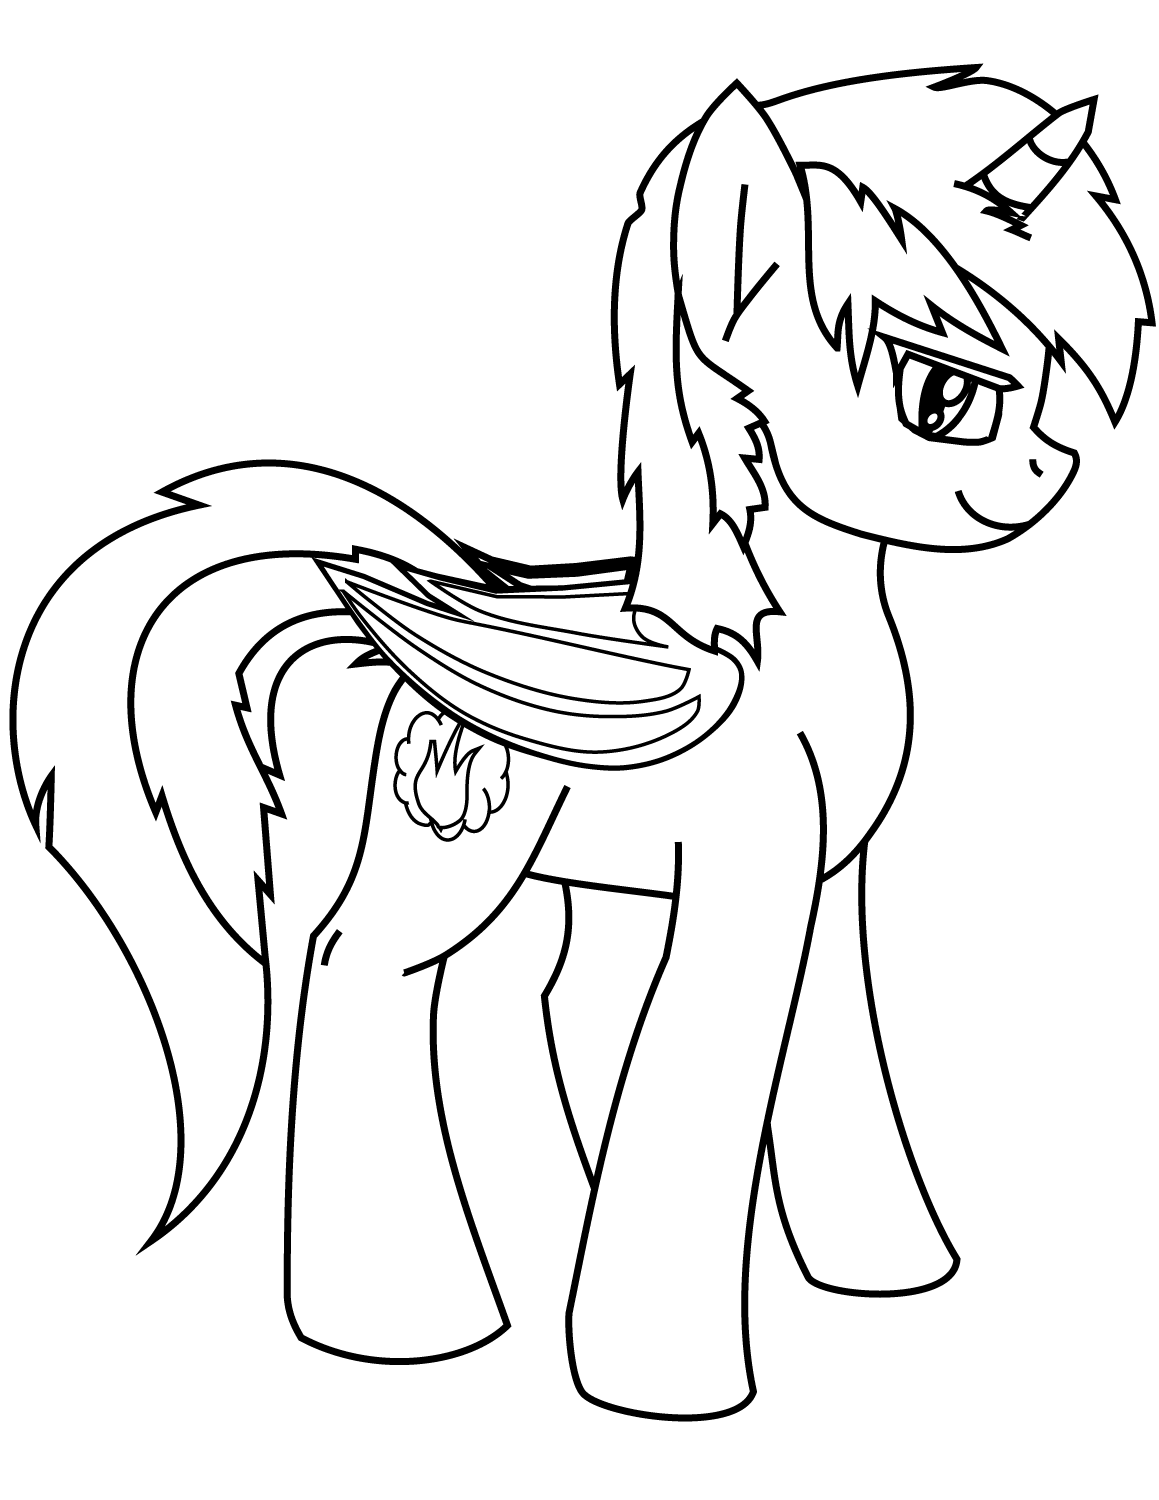 Cute Pony Unicorn 3 Coloring Page